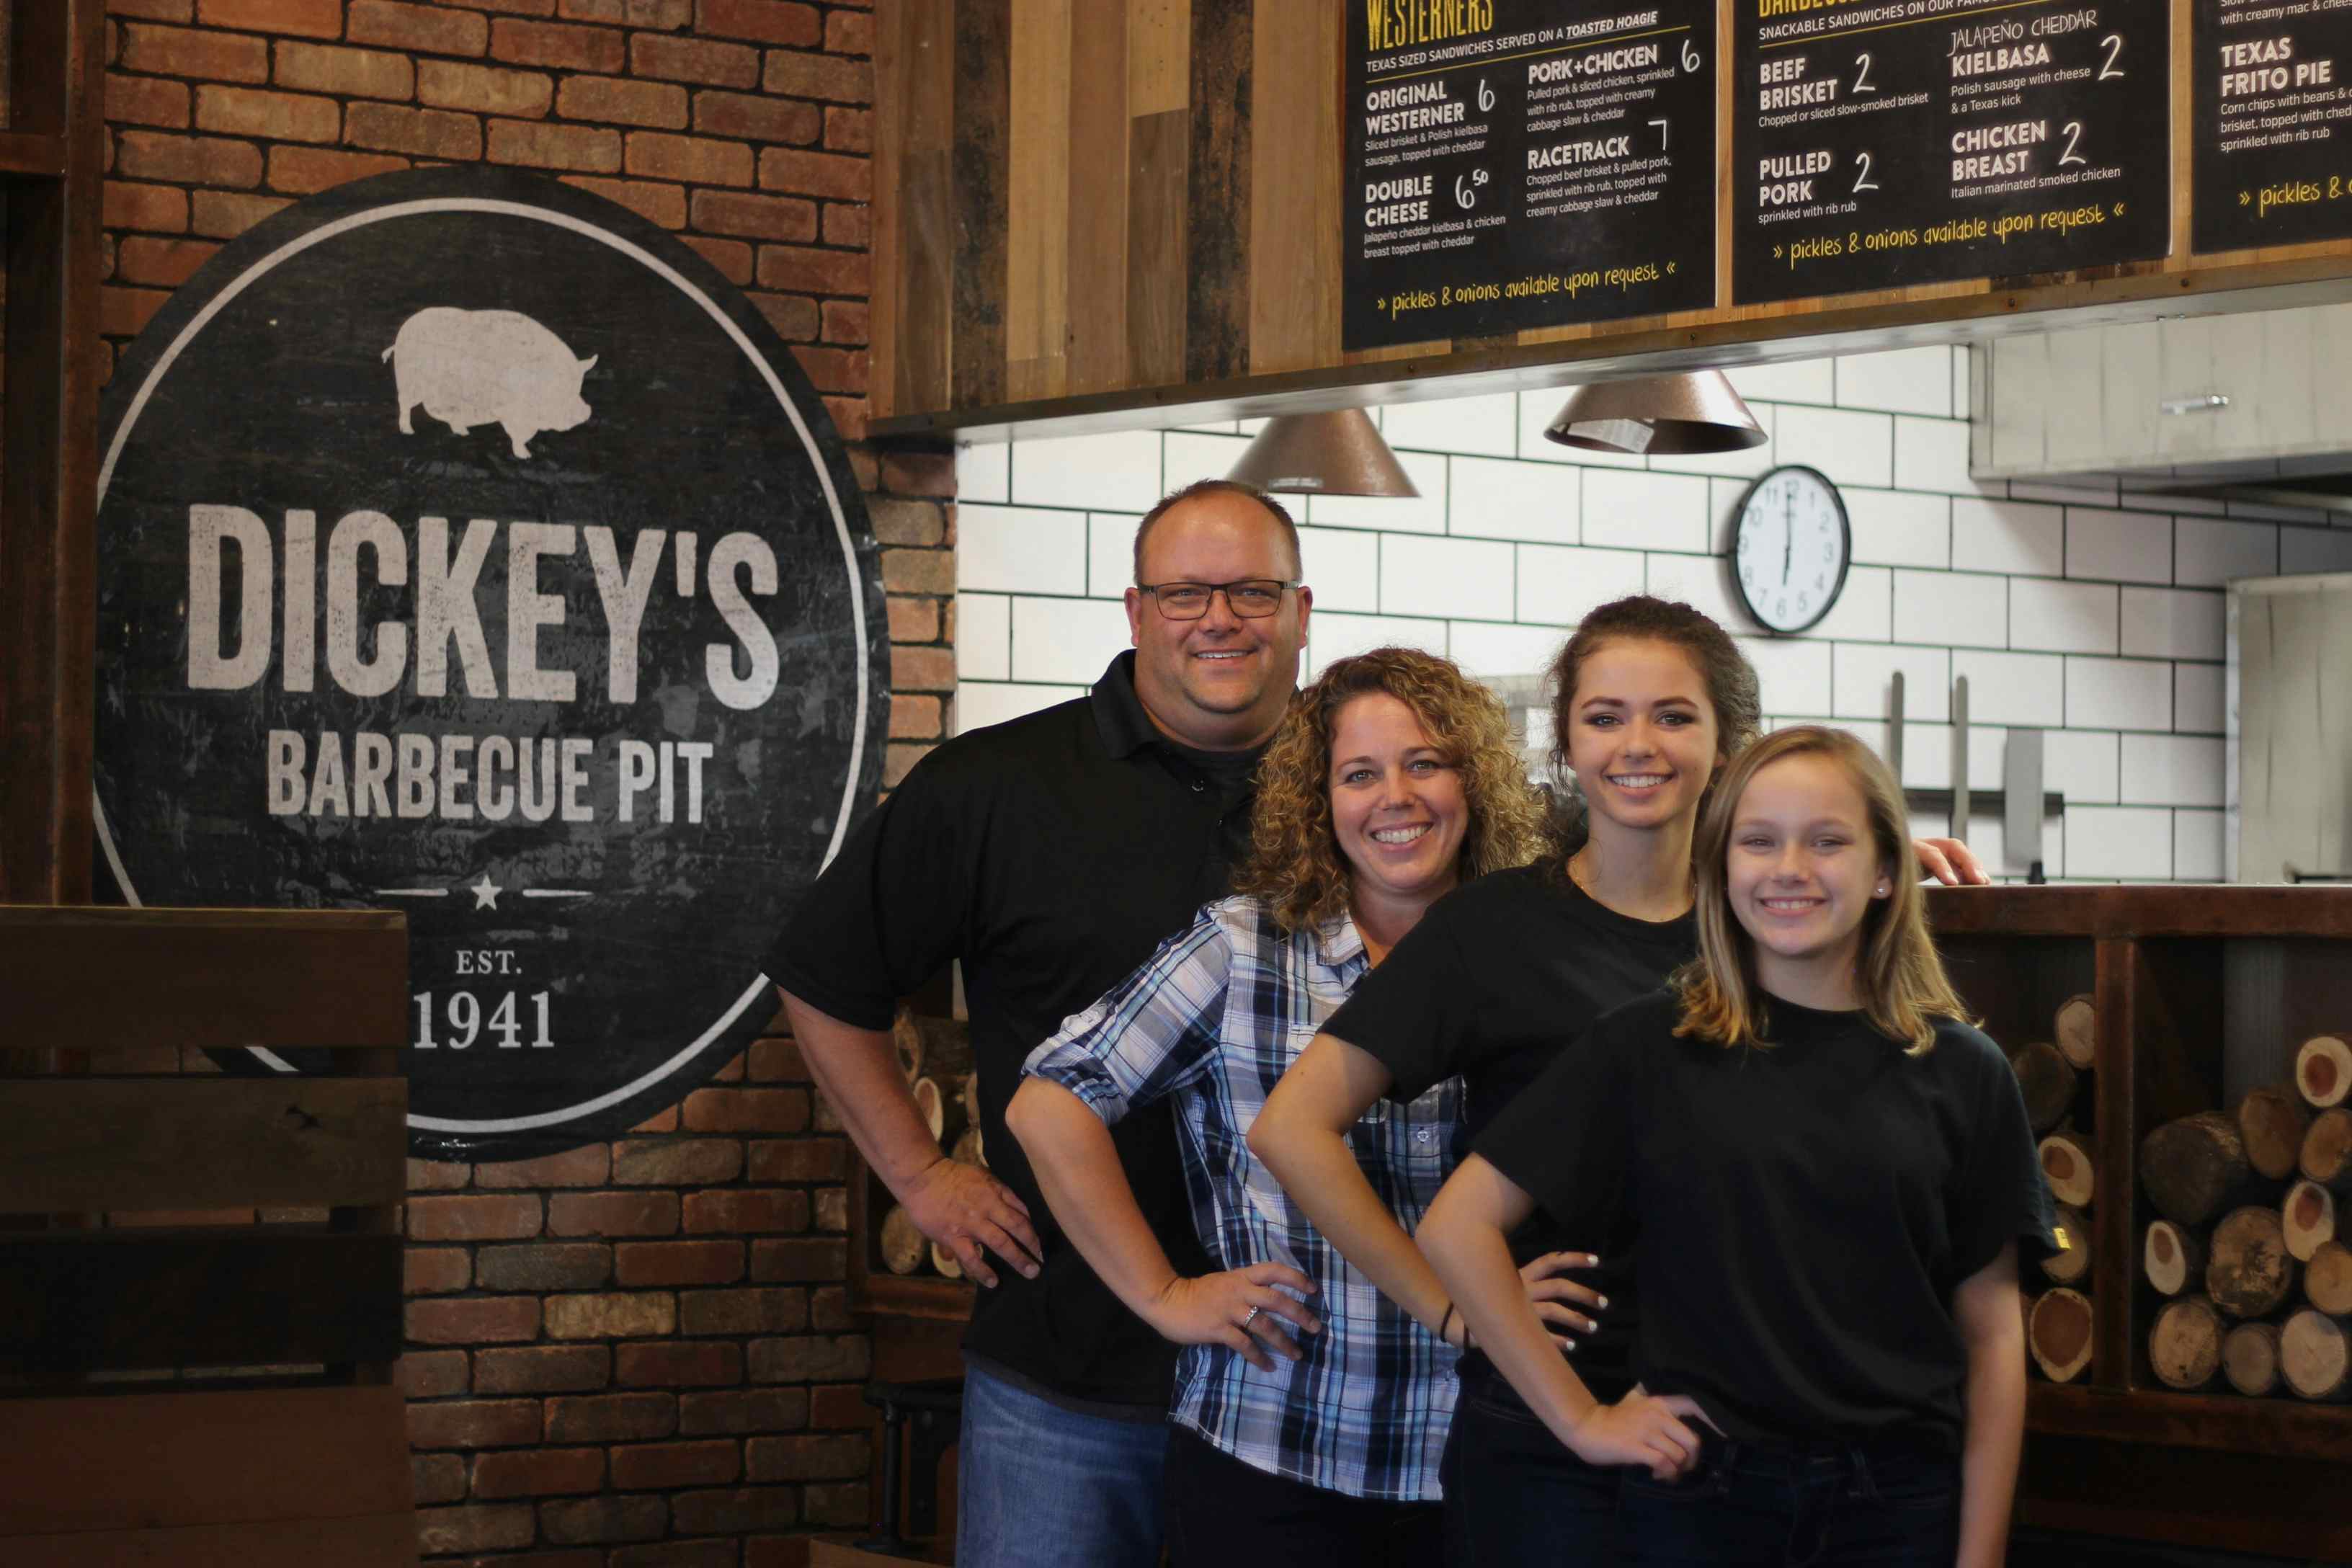 Dickey’s Barbecue Pit Brings Texas-style Barbecue to the Beach: New Location Opens in Bradenton, FL